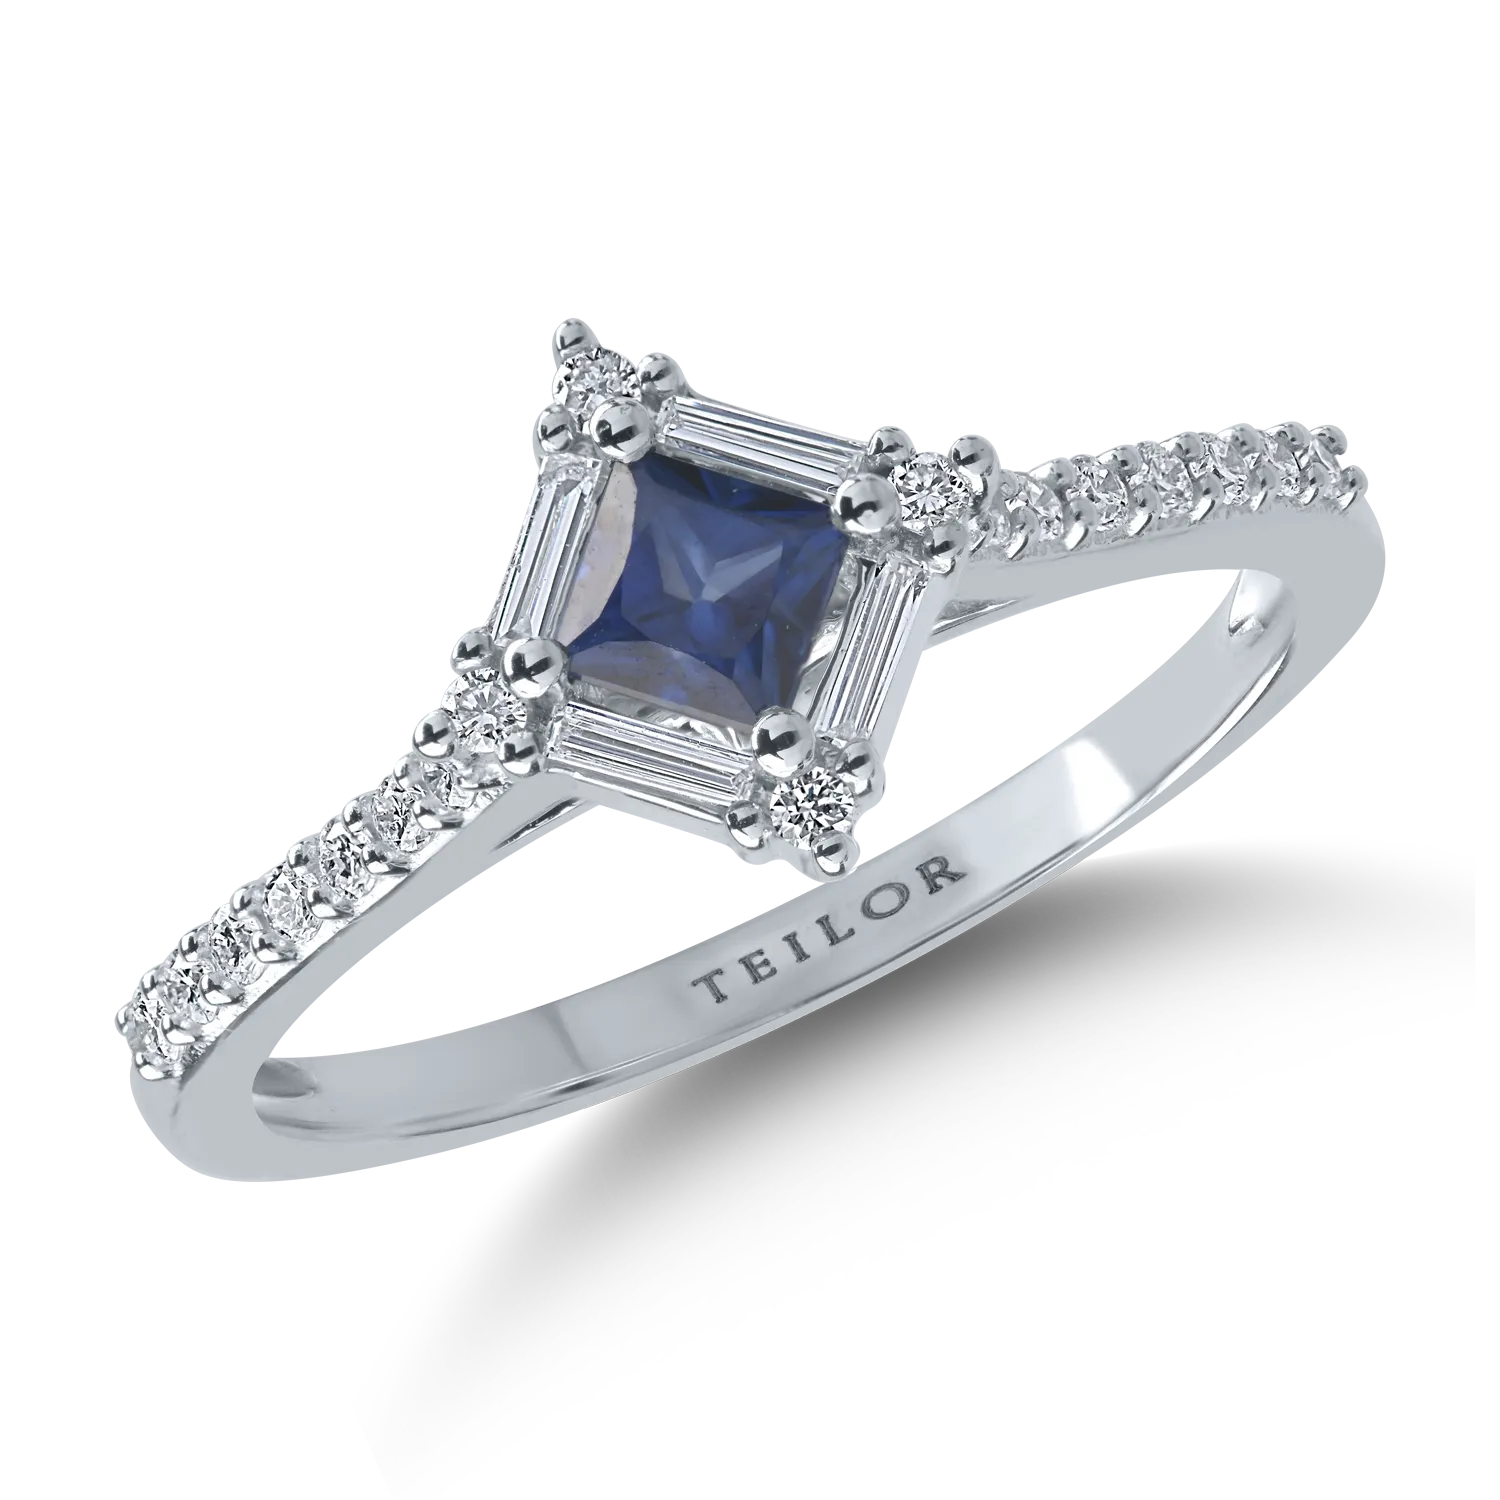 White gold ring with 0.3ct sapphire and 0.18ct diamonds